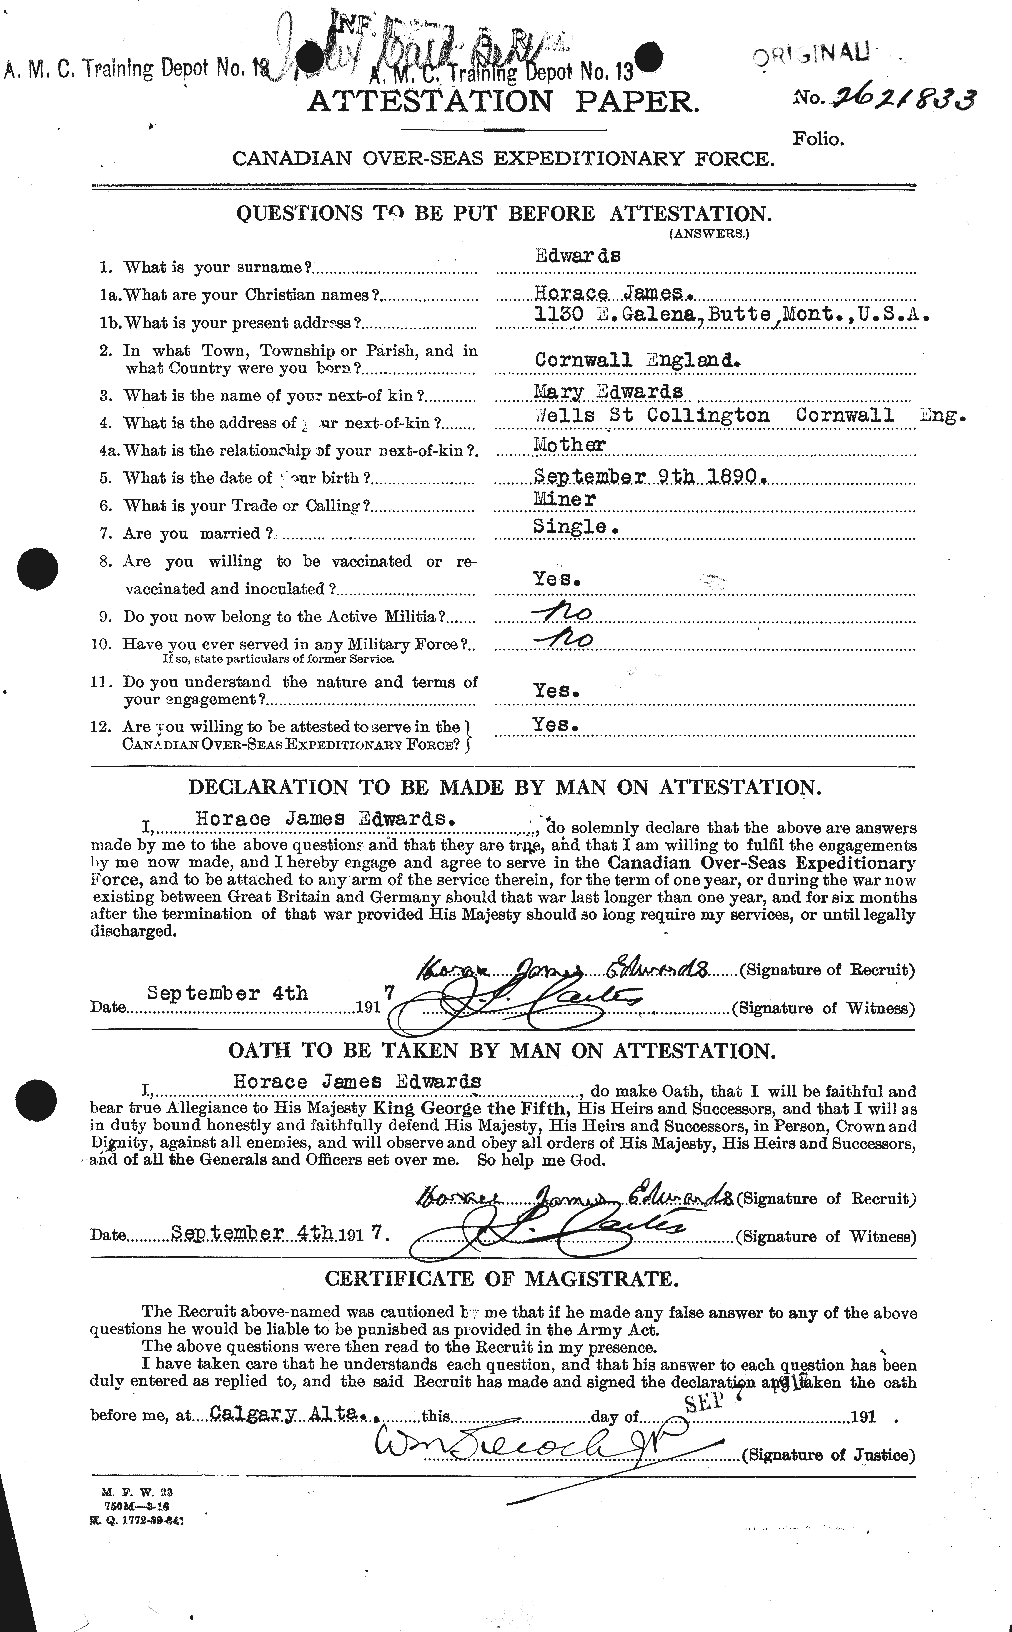 Personnel Records of the First World War - CEF 309786a